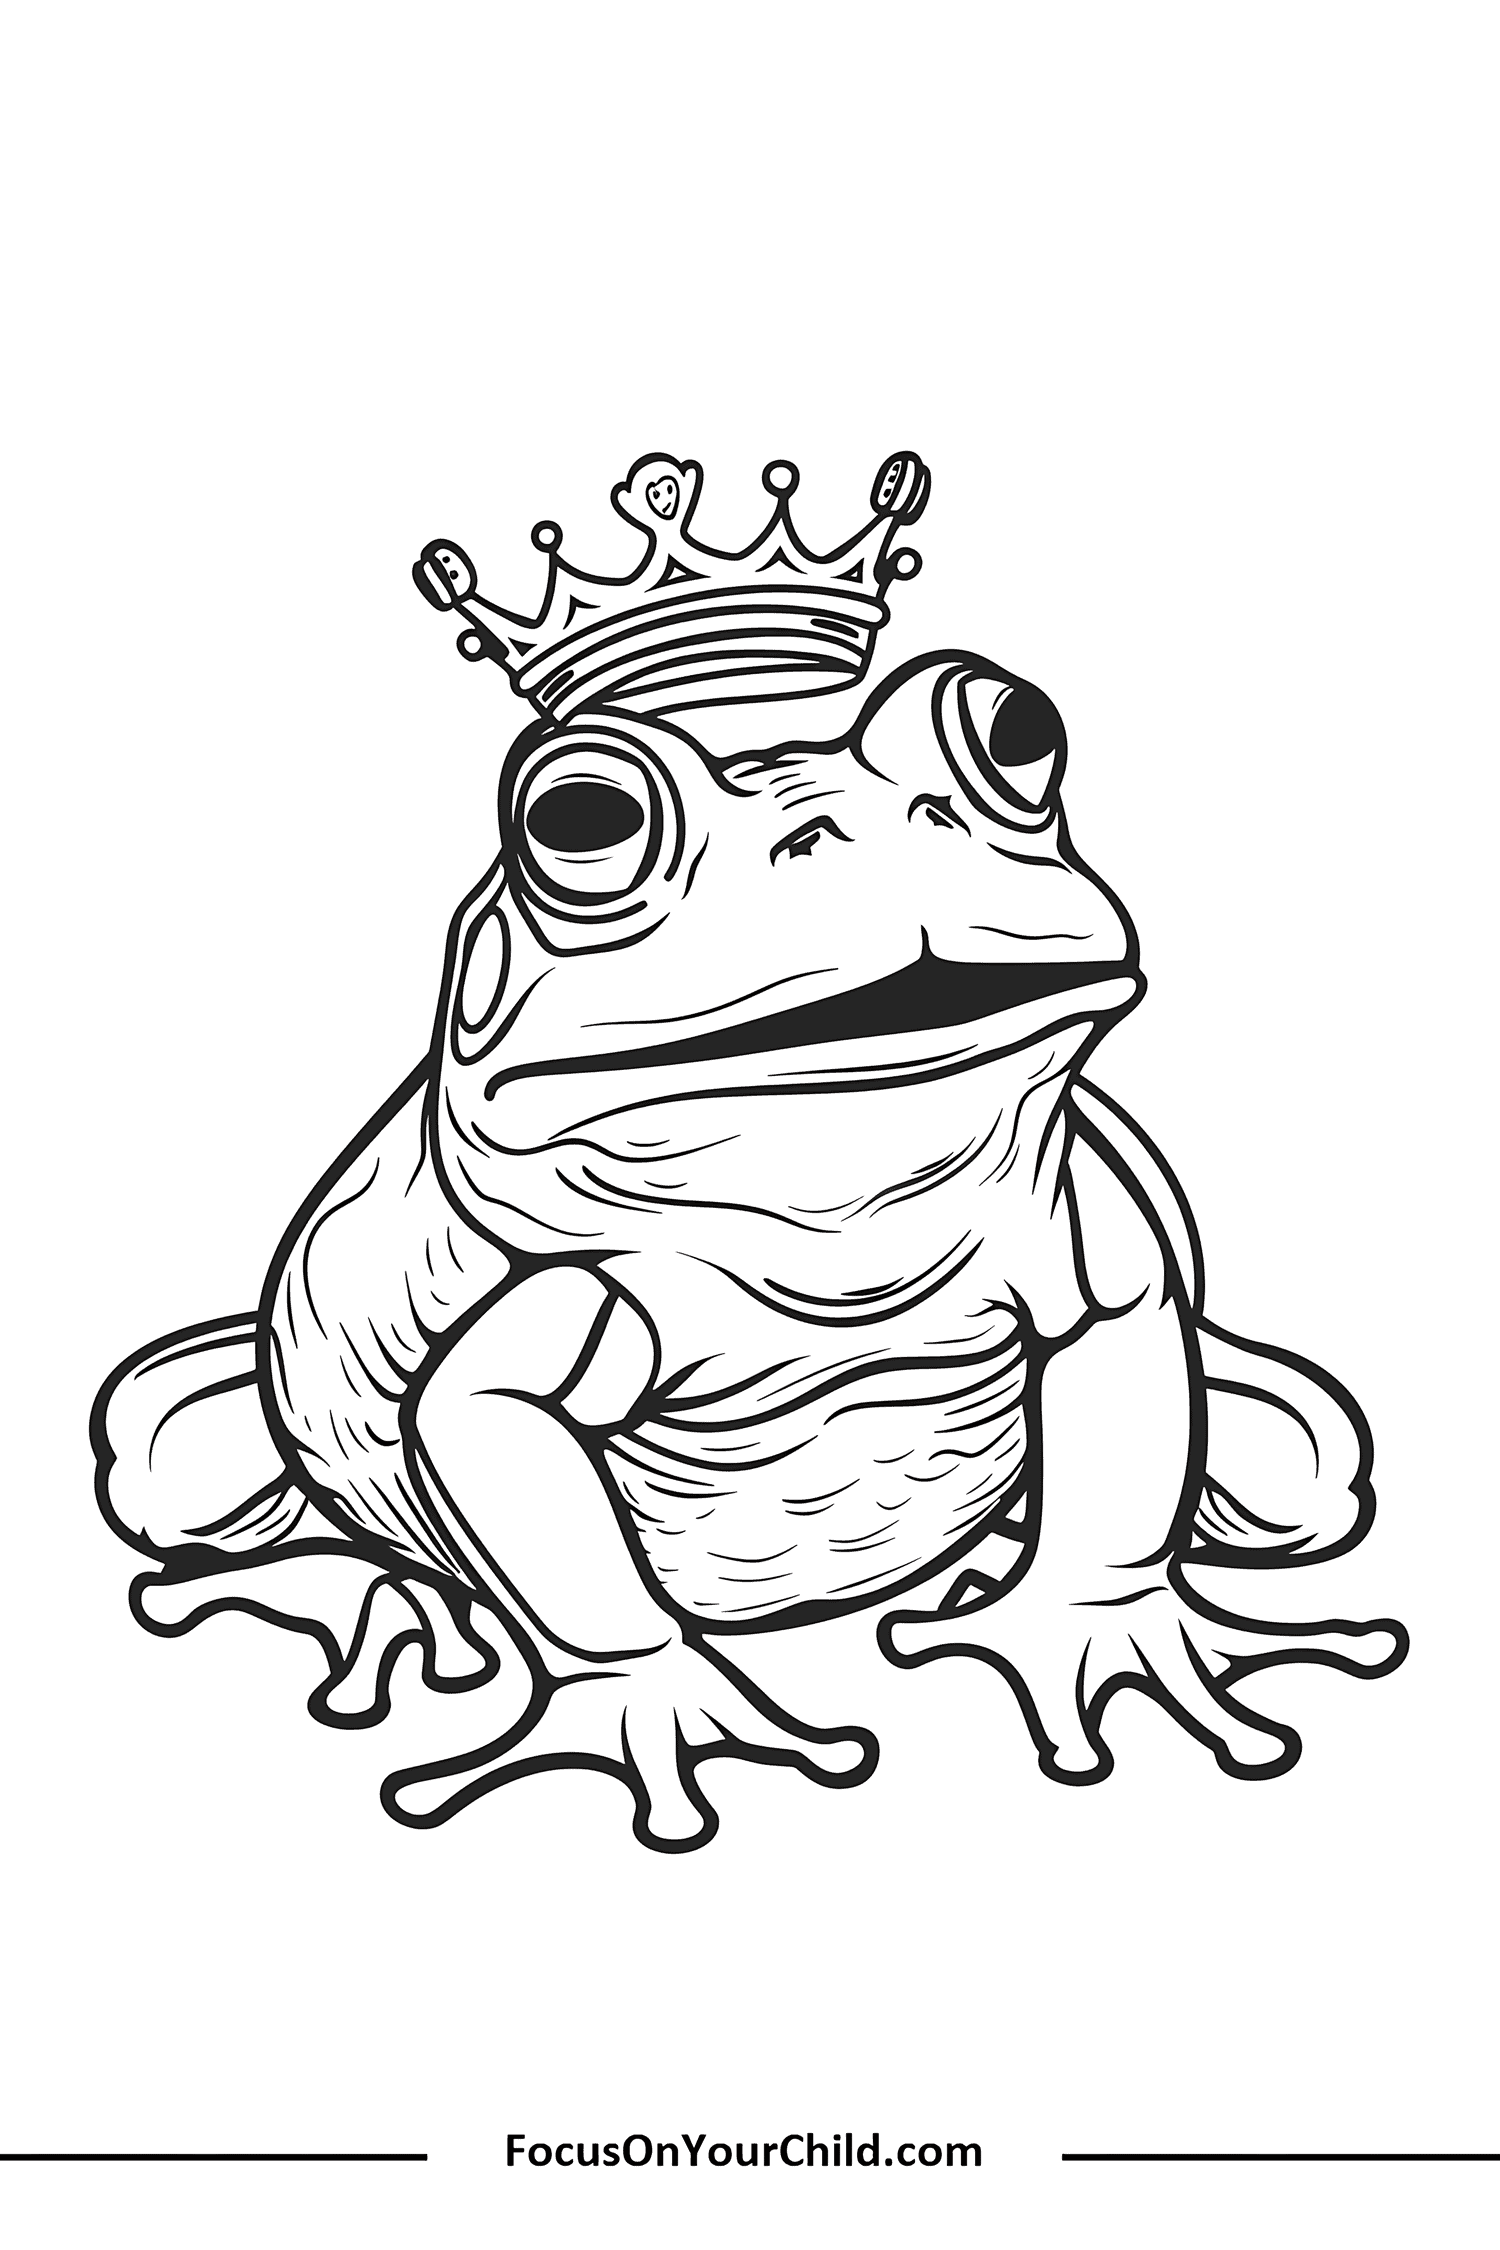 Detailed black-and-white line drawing of a frog with a crown, adding whimsical charm.